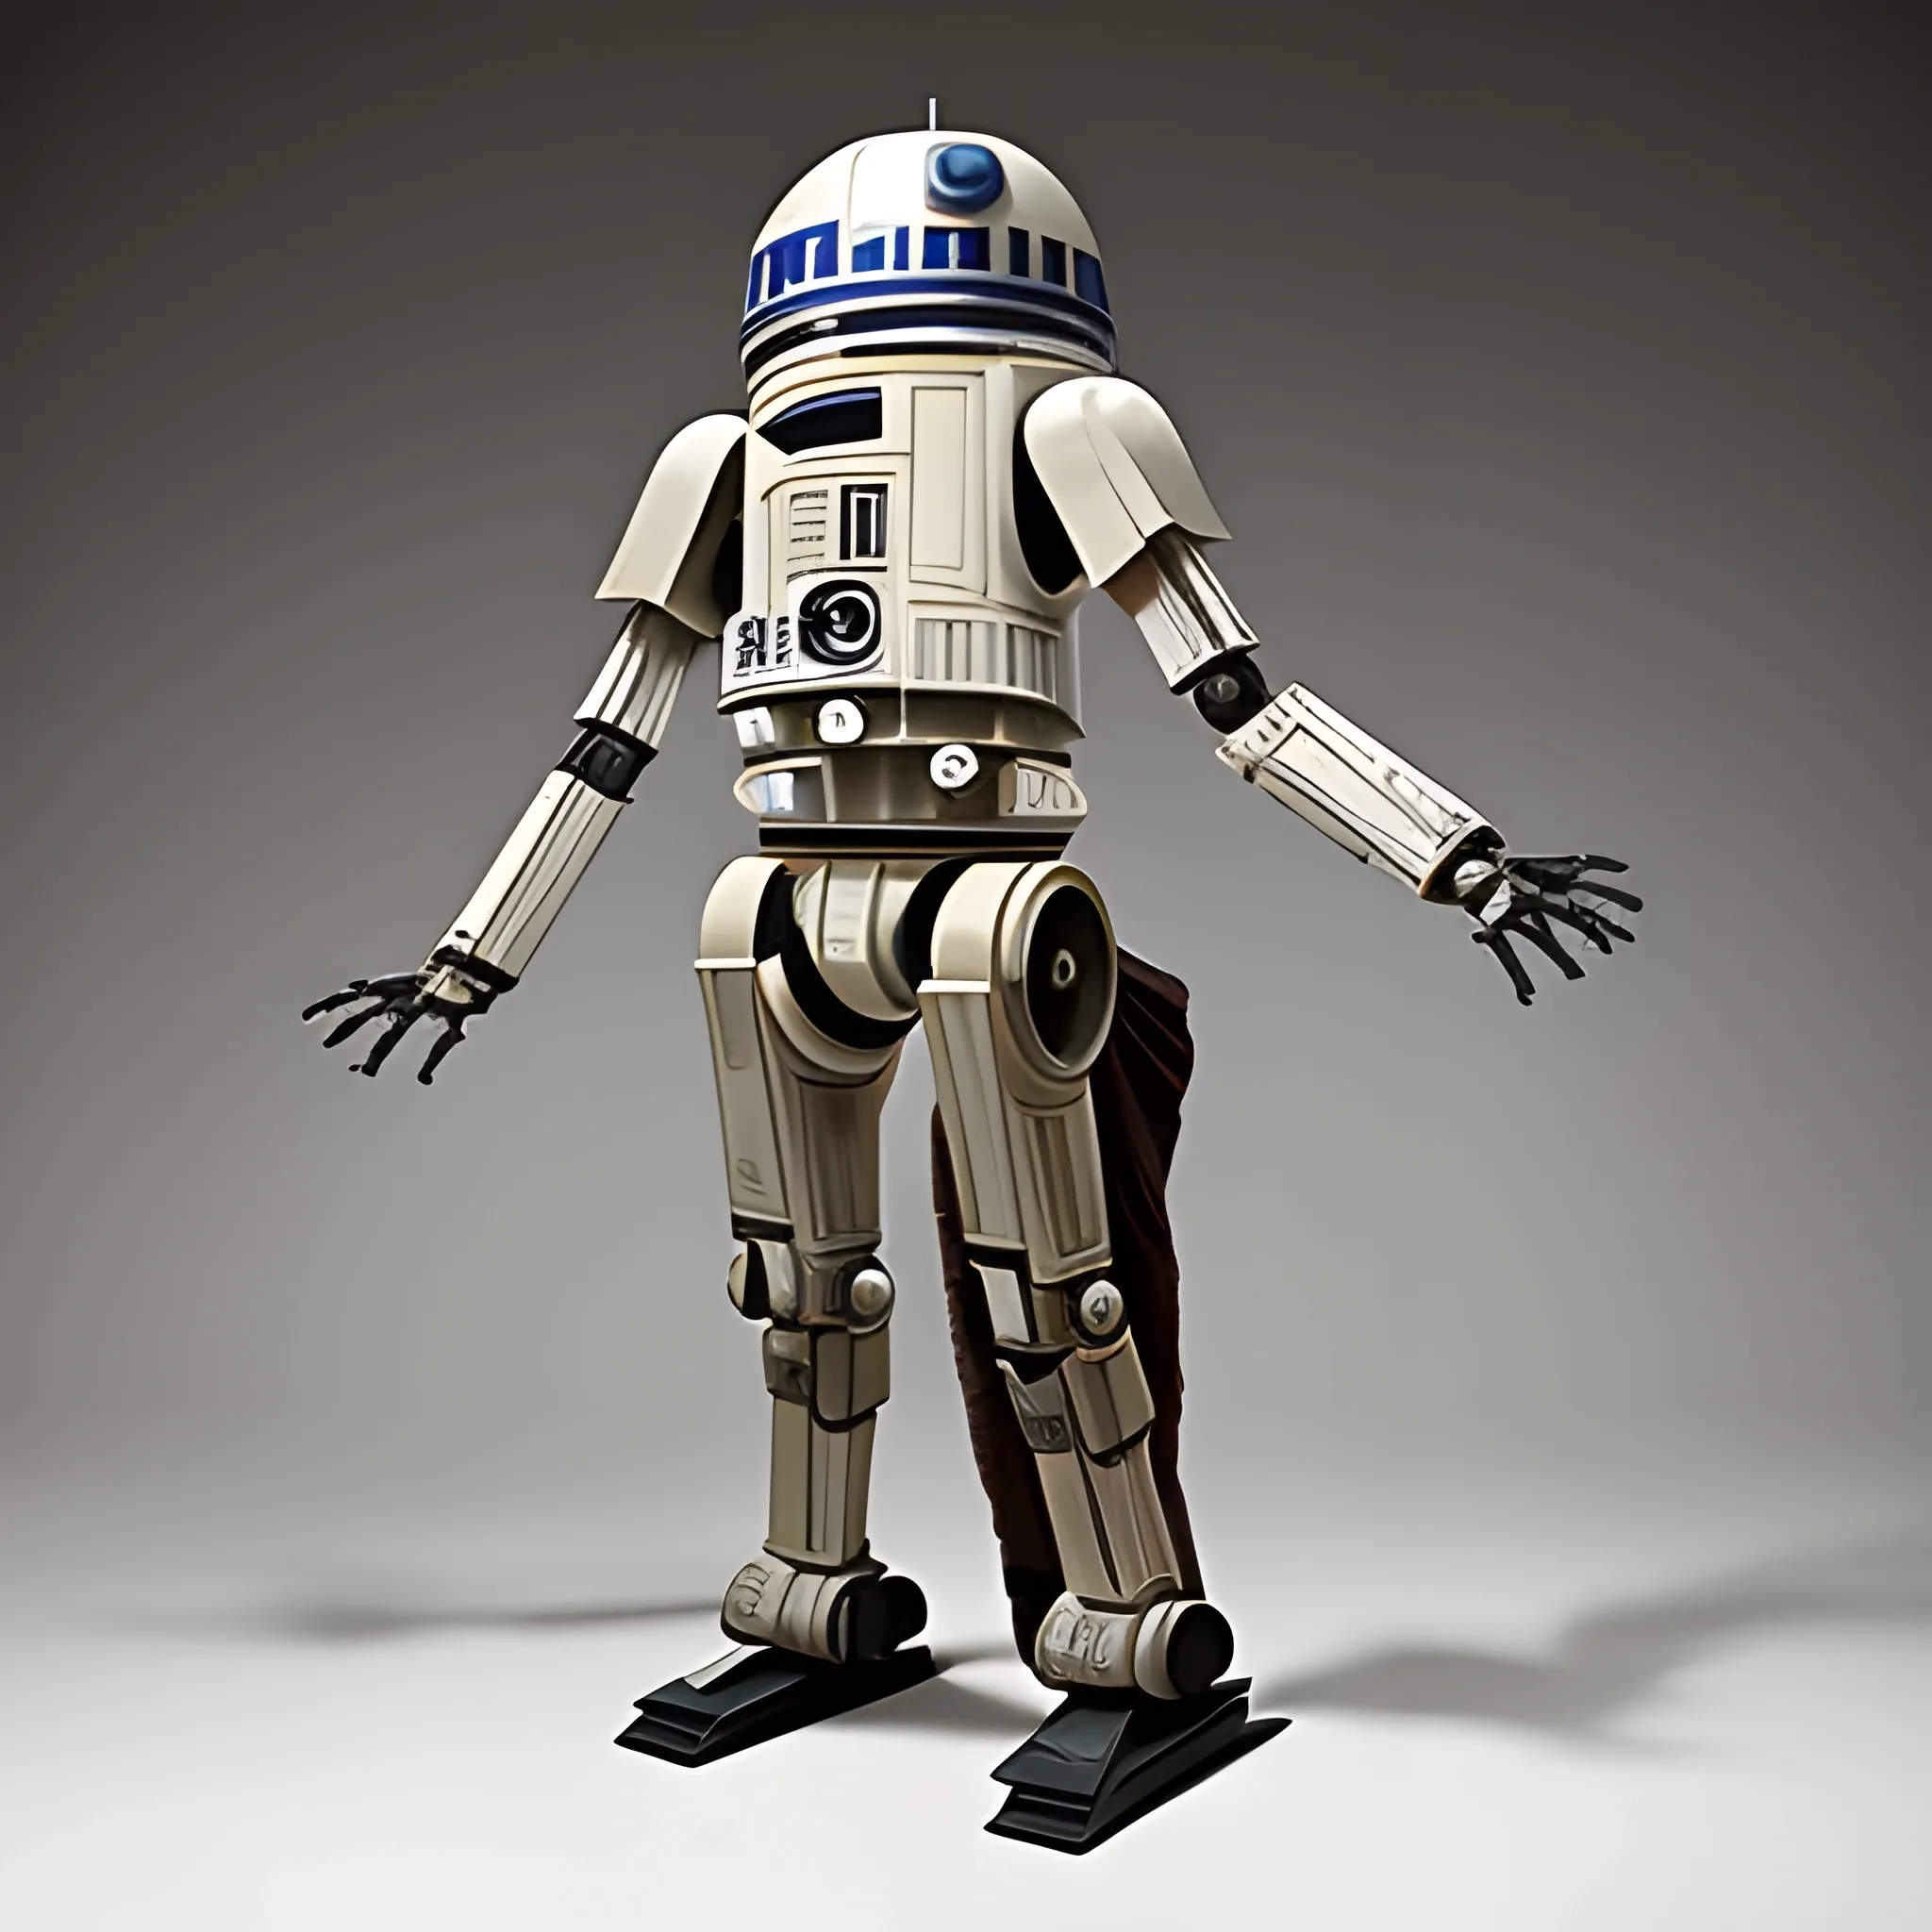 full body star wars character with the body of a super battle droid, the head of an astromech droid, and the limbs of a protocol droid